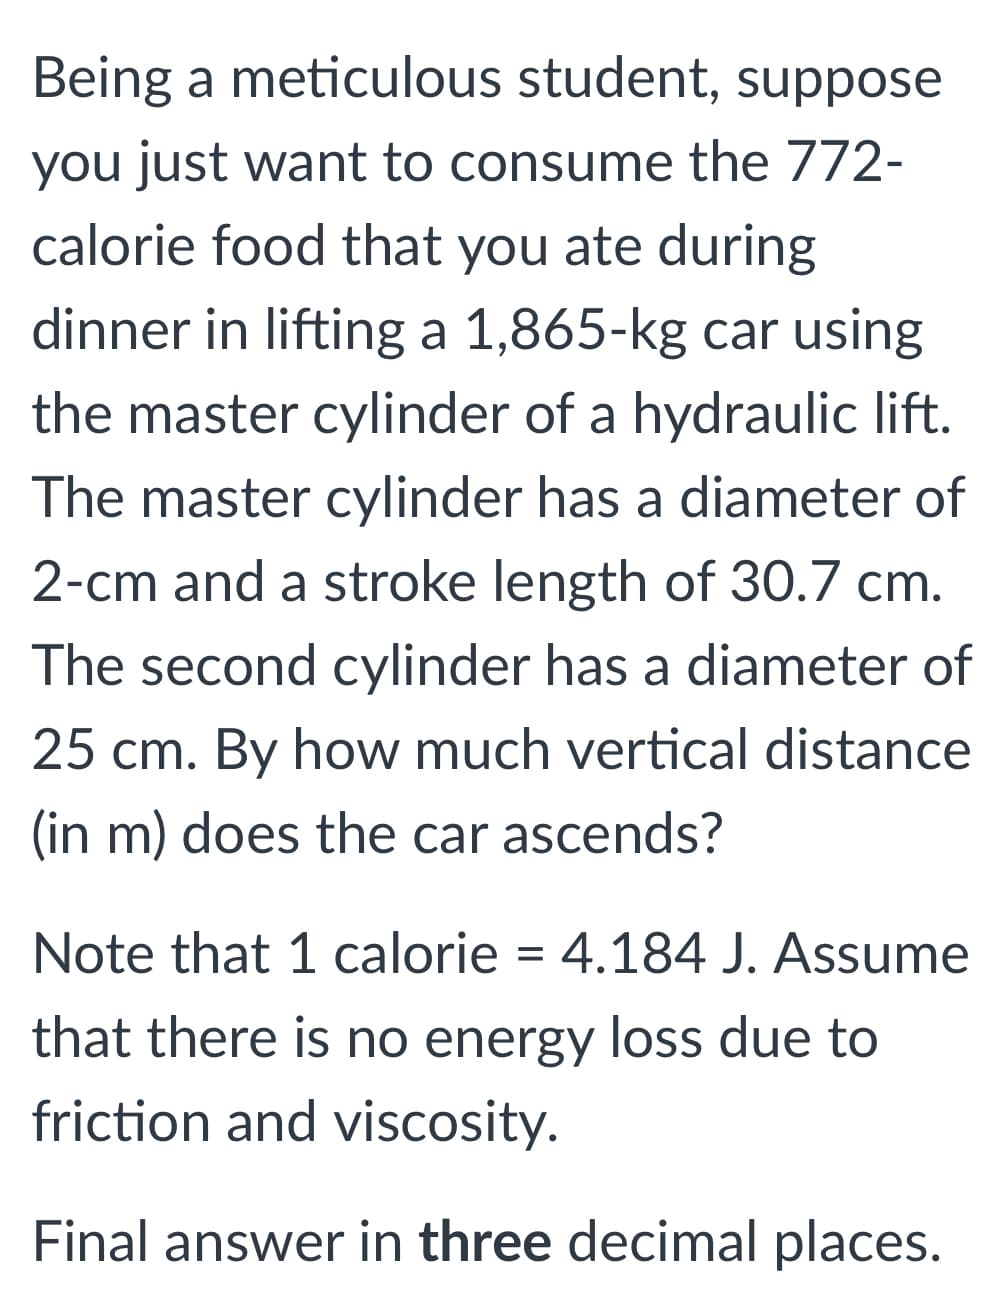 Being a meticulous student, suppose
you just want to consume the 772-
calorie food that you ate during
dinner in lifting a 1,865-kg car using
the master cylinder of a hydraulic lift.
The master cylinder has a diameter of
2-cm and a stroke length of 30.7 cm.
The second cylinder has a diameter of
25 cm. By how much vertical distance
(in m) does the car ascends?
Note that 1 calorie = 4.184 J. Assume
that there is no energy loss due to
friction and viscosity.
Final answer in three decimal places.
